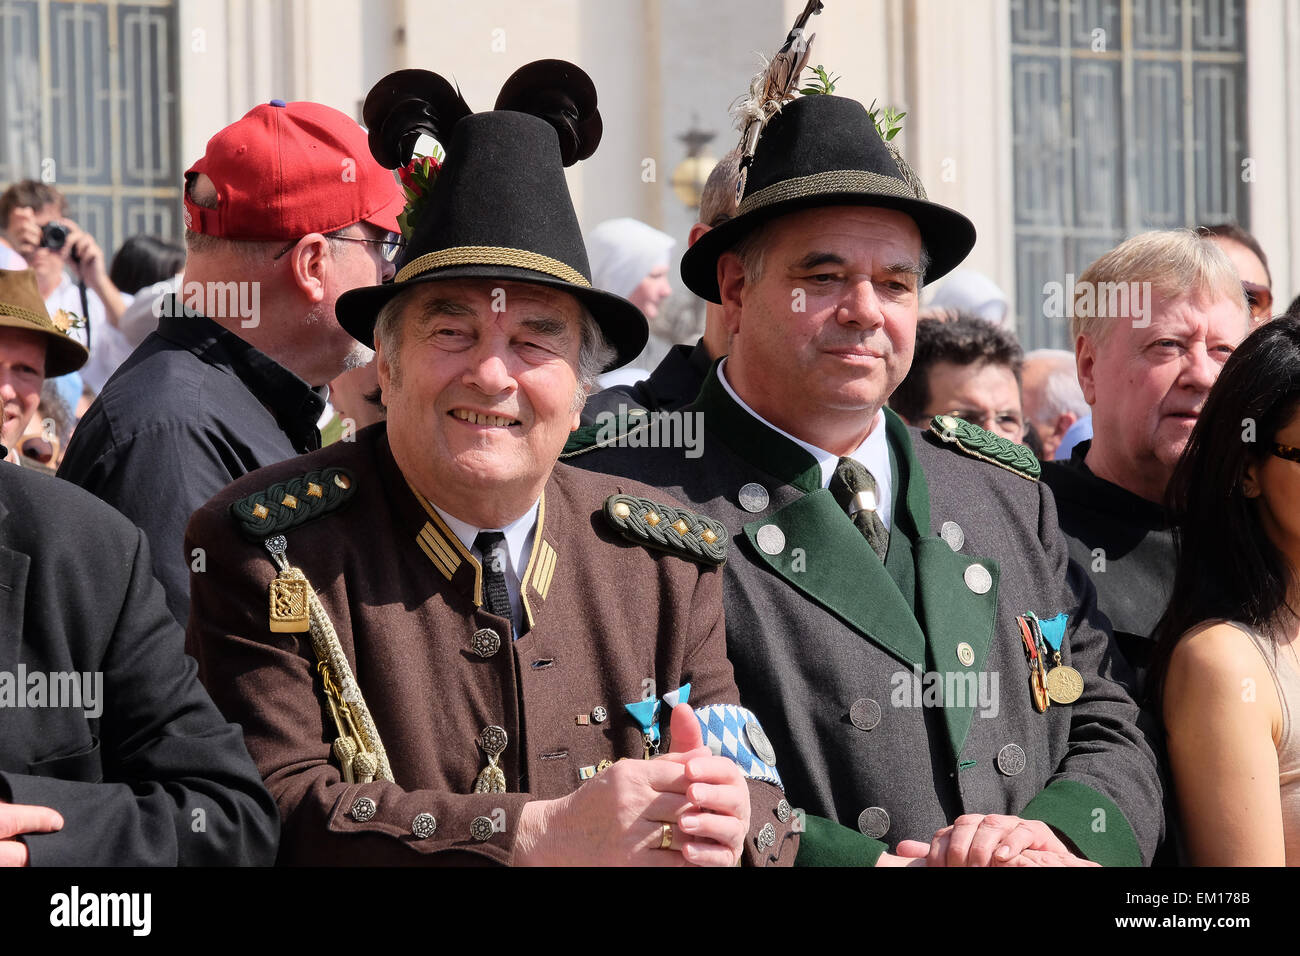 Vatikanstadt 15. April 2015 Papst Francis General Audience in St Peter's Square Credit: wirklich Easy Star/Alamy Live News Stockfoto